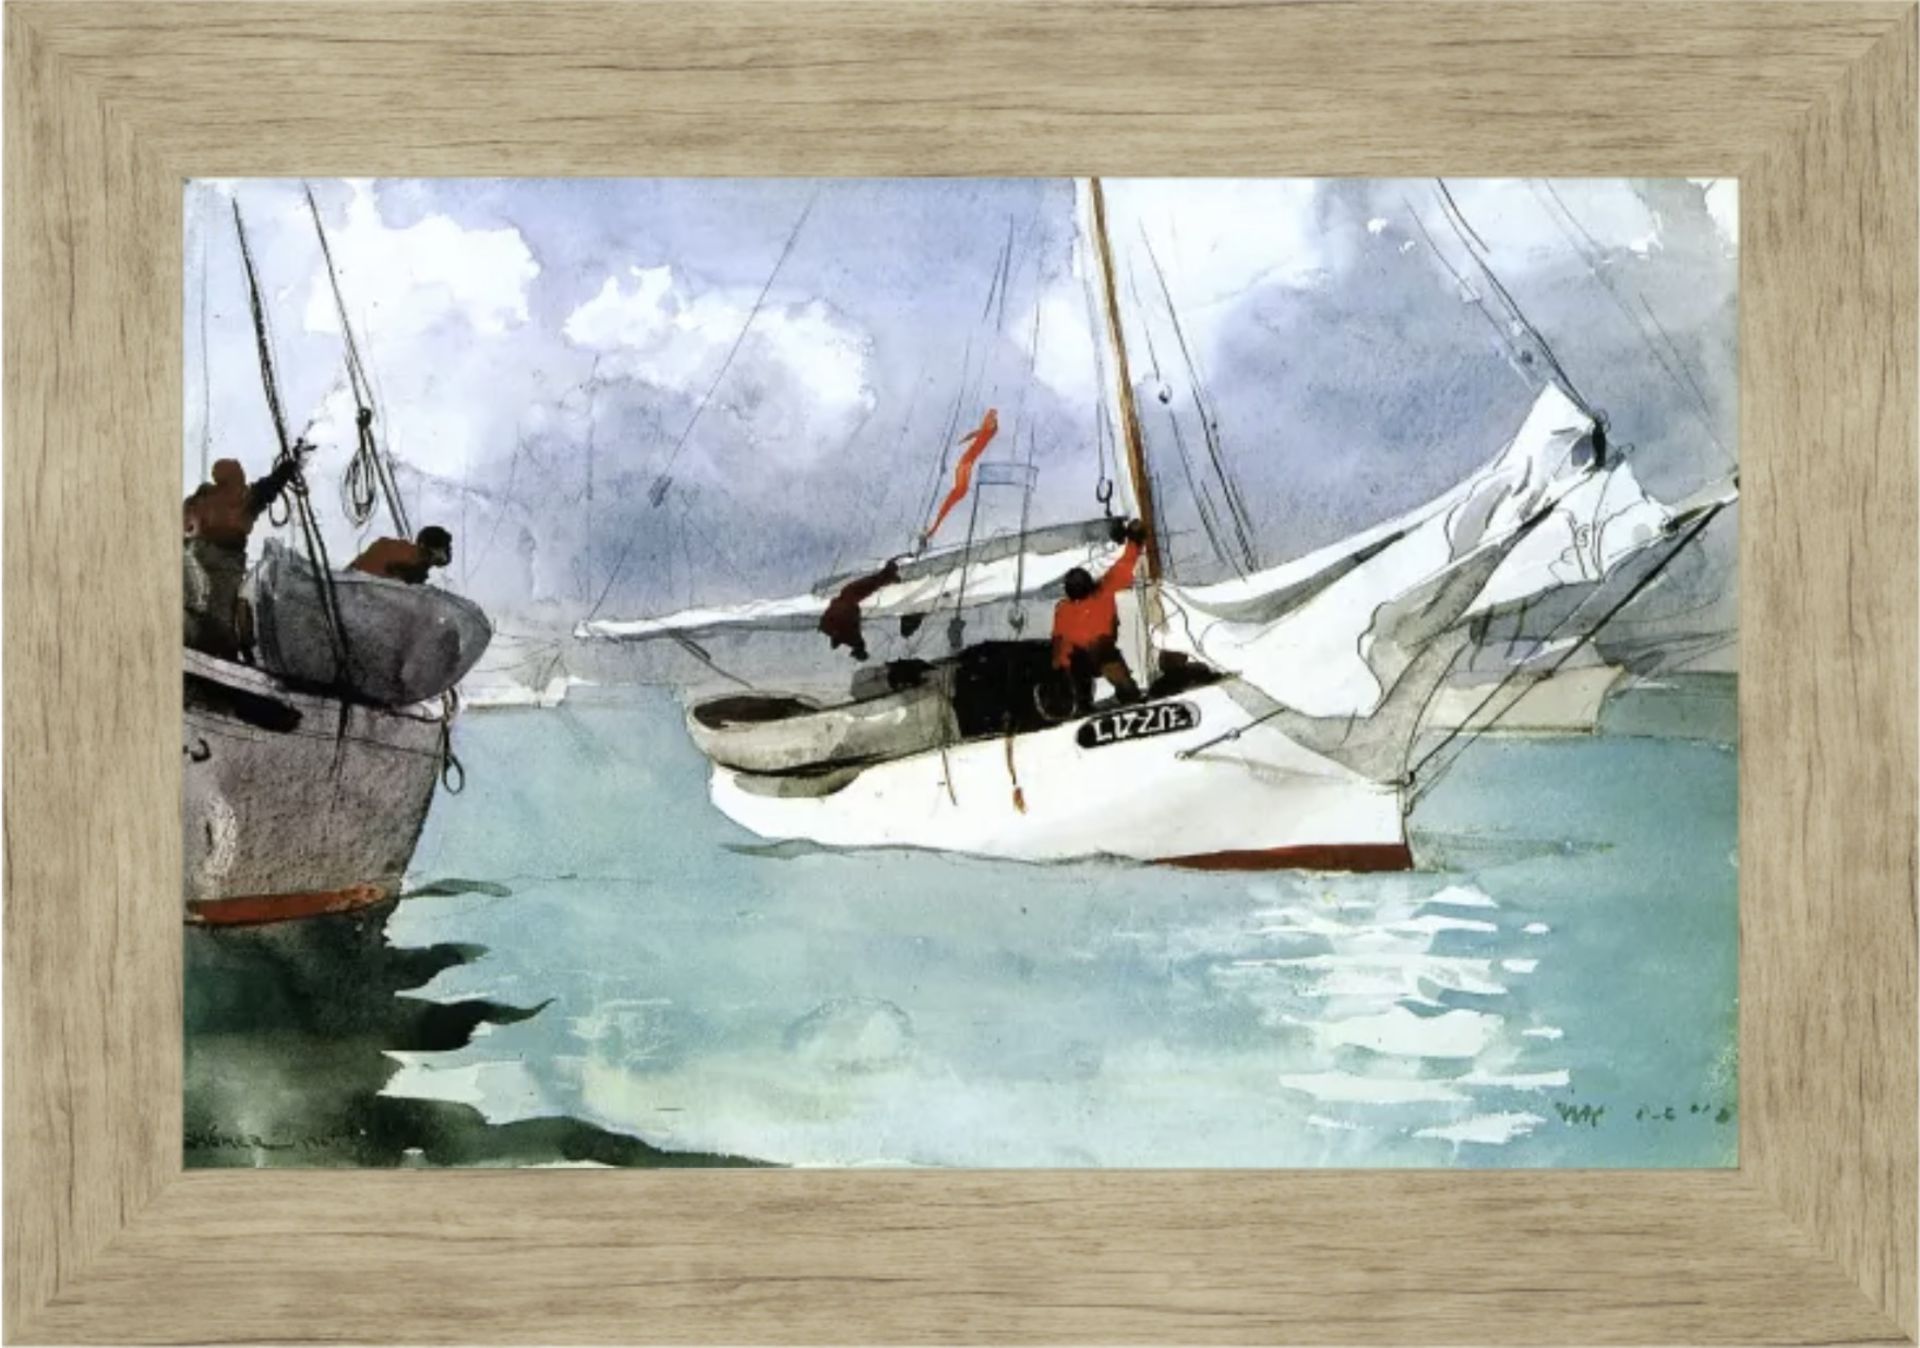 Winslow Homer "Fishing Boats, Key West" Oil Painting